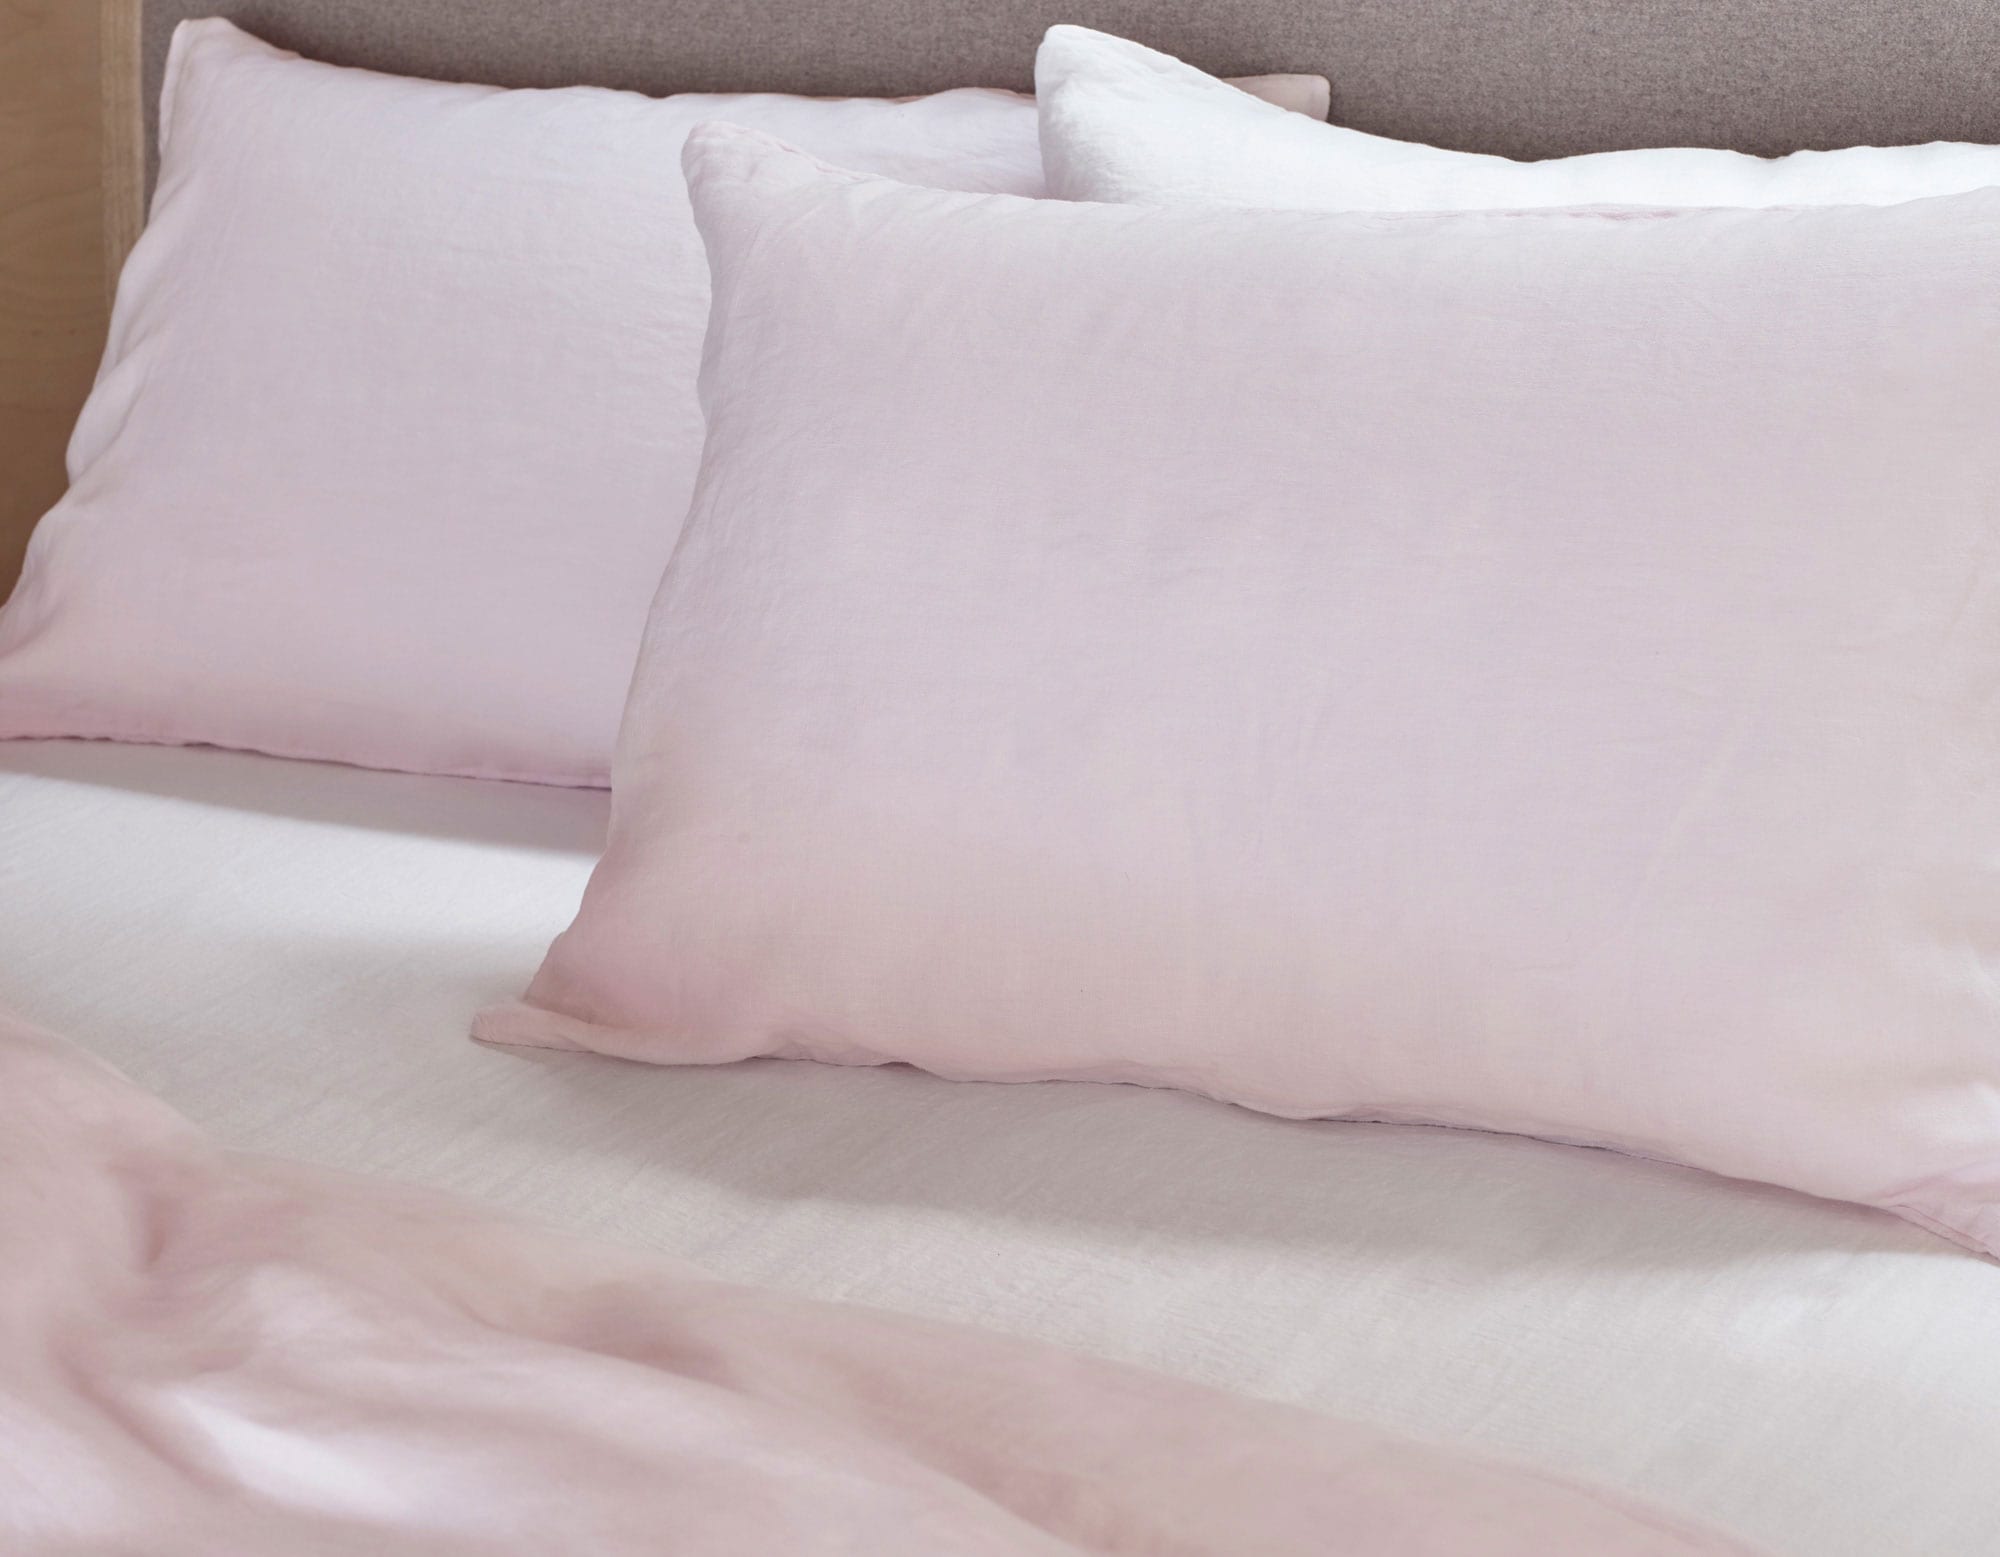 Pink linen bedding on made bed